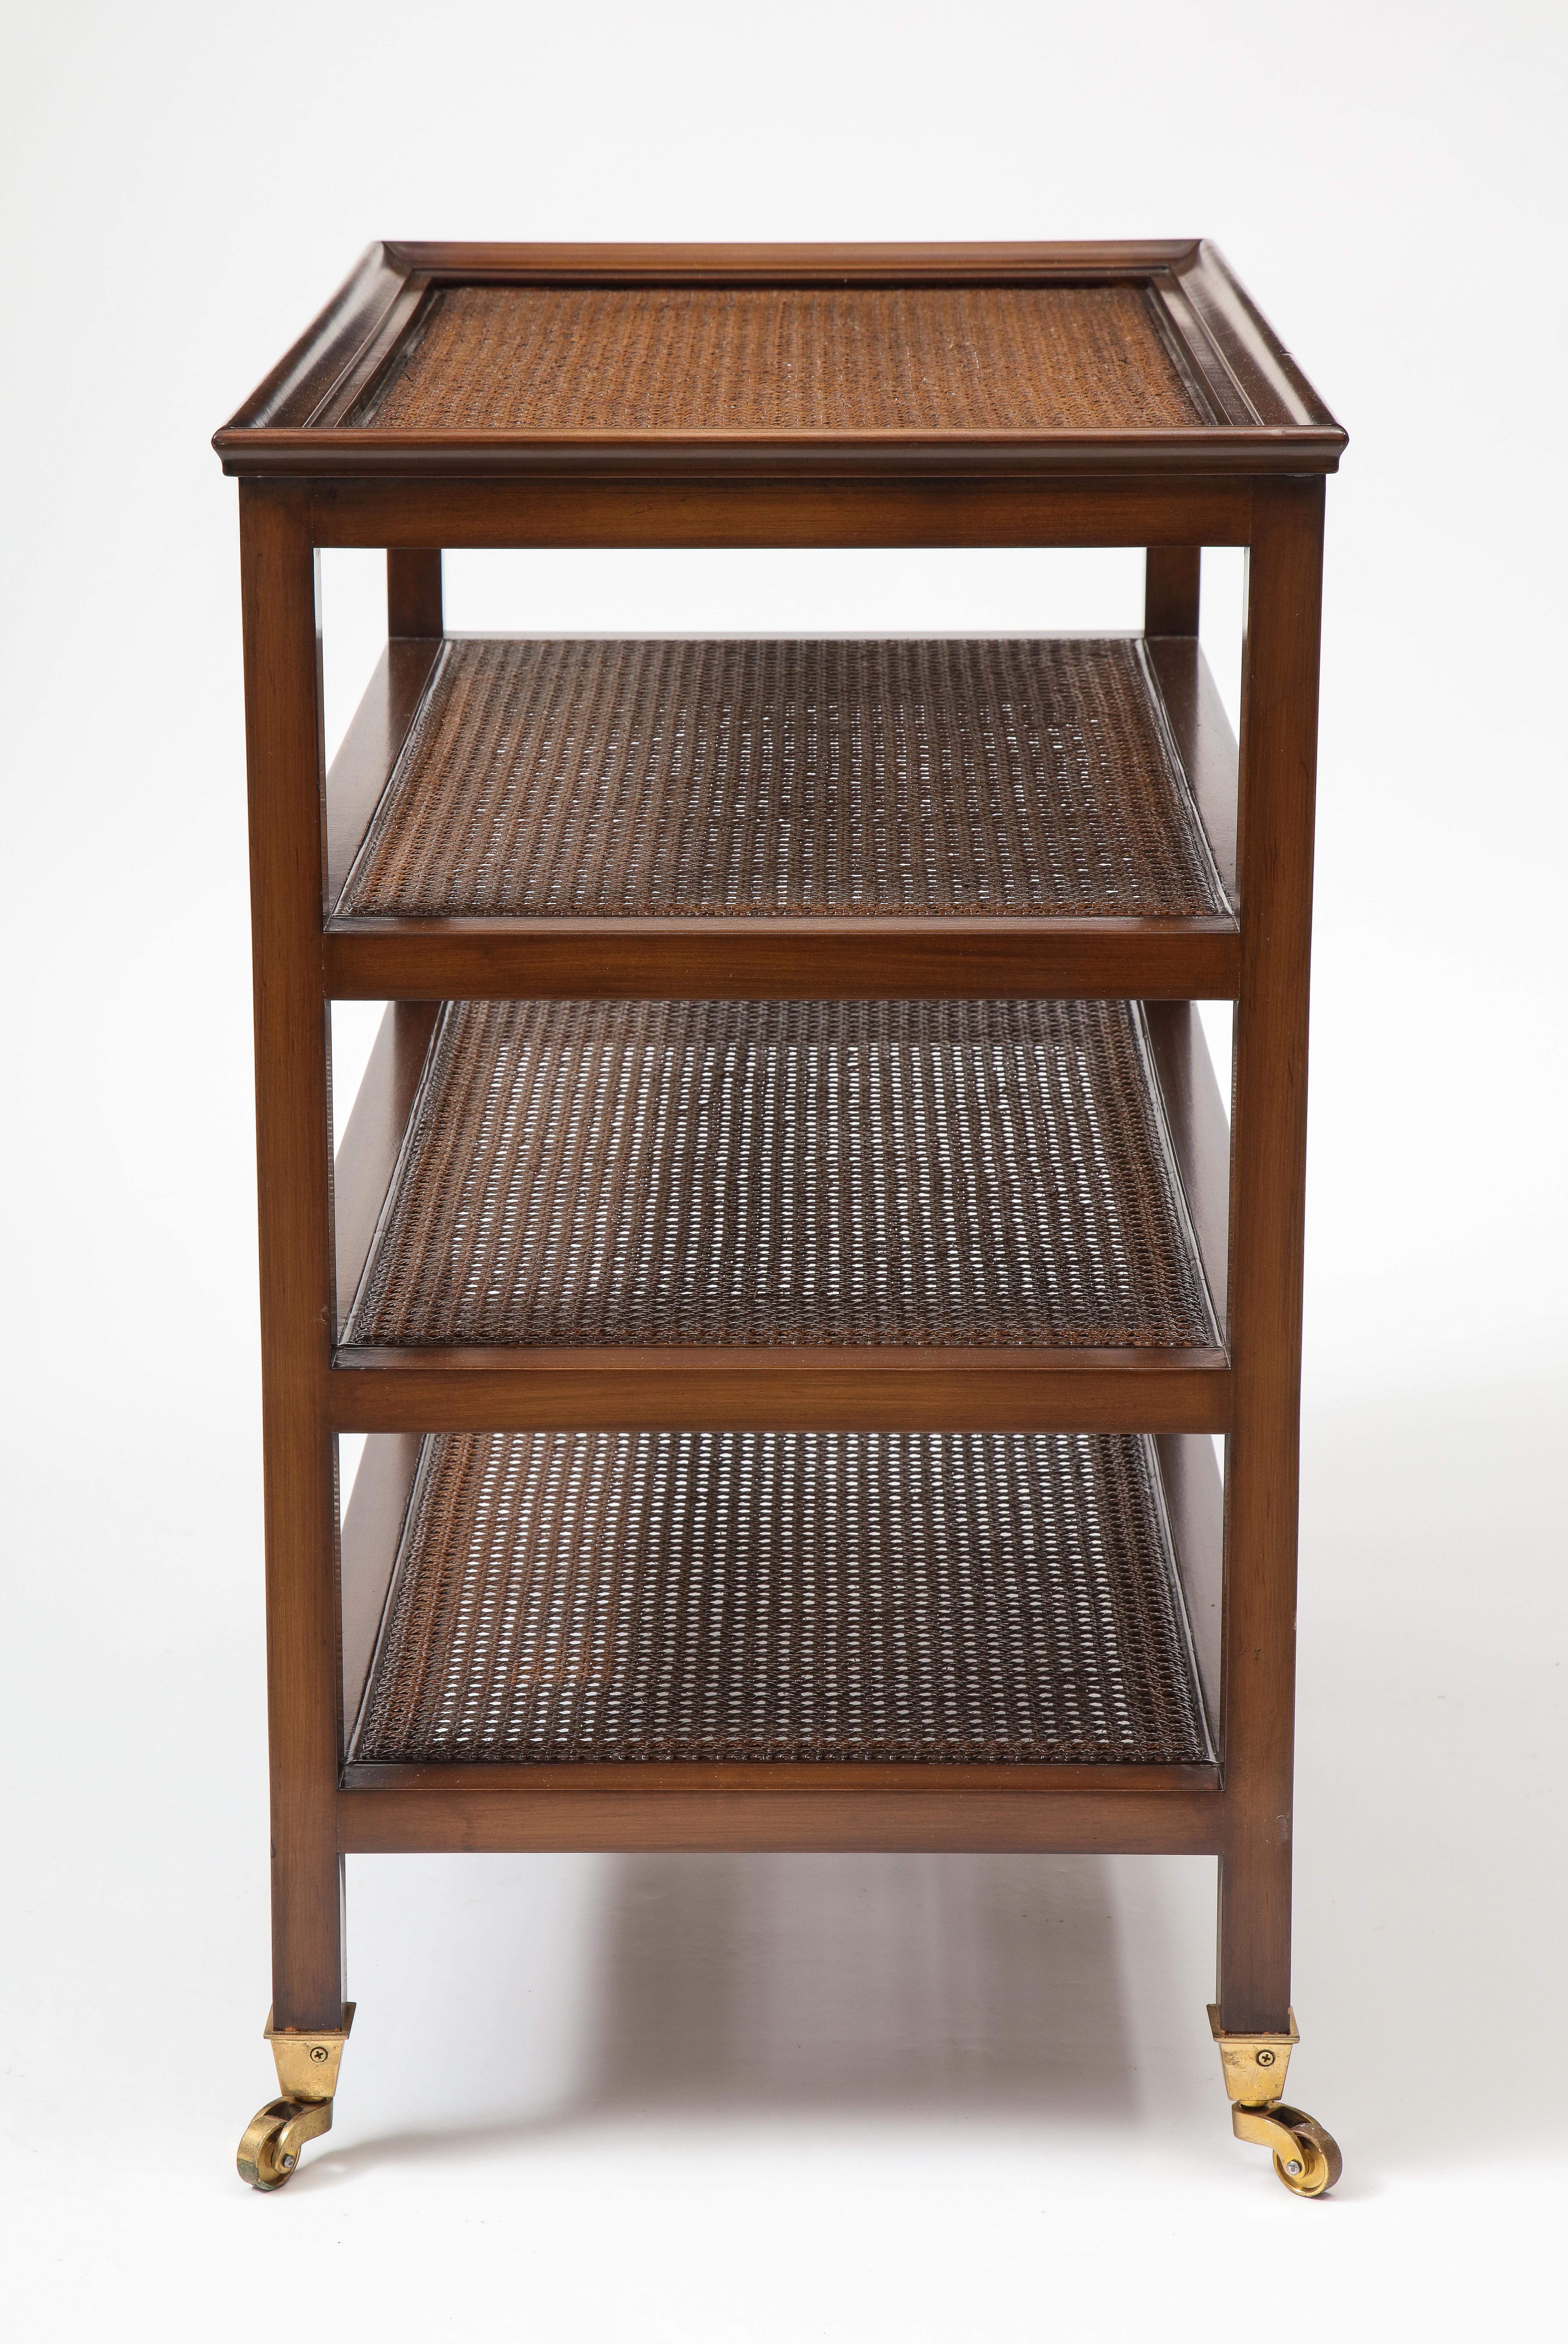 20th Century Four-Tier Caned Étagere